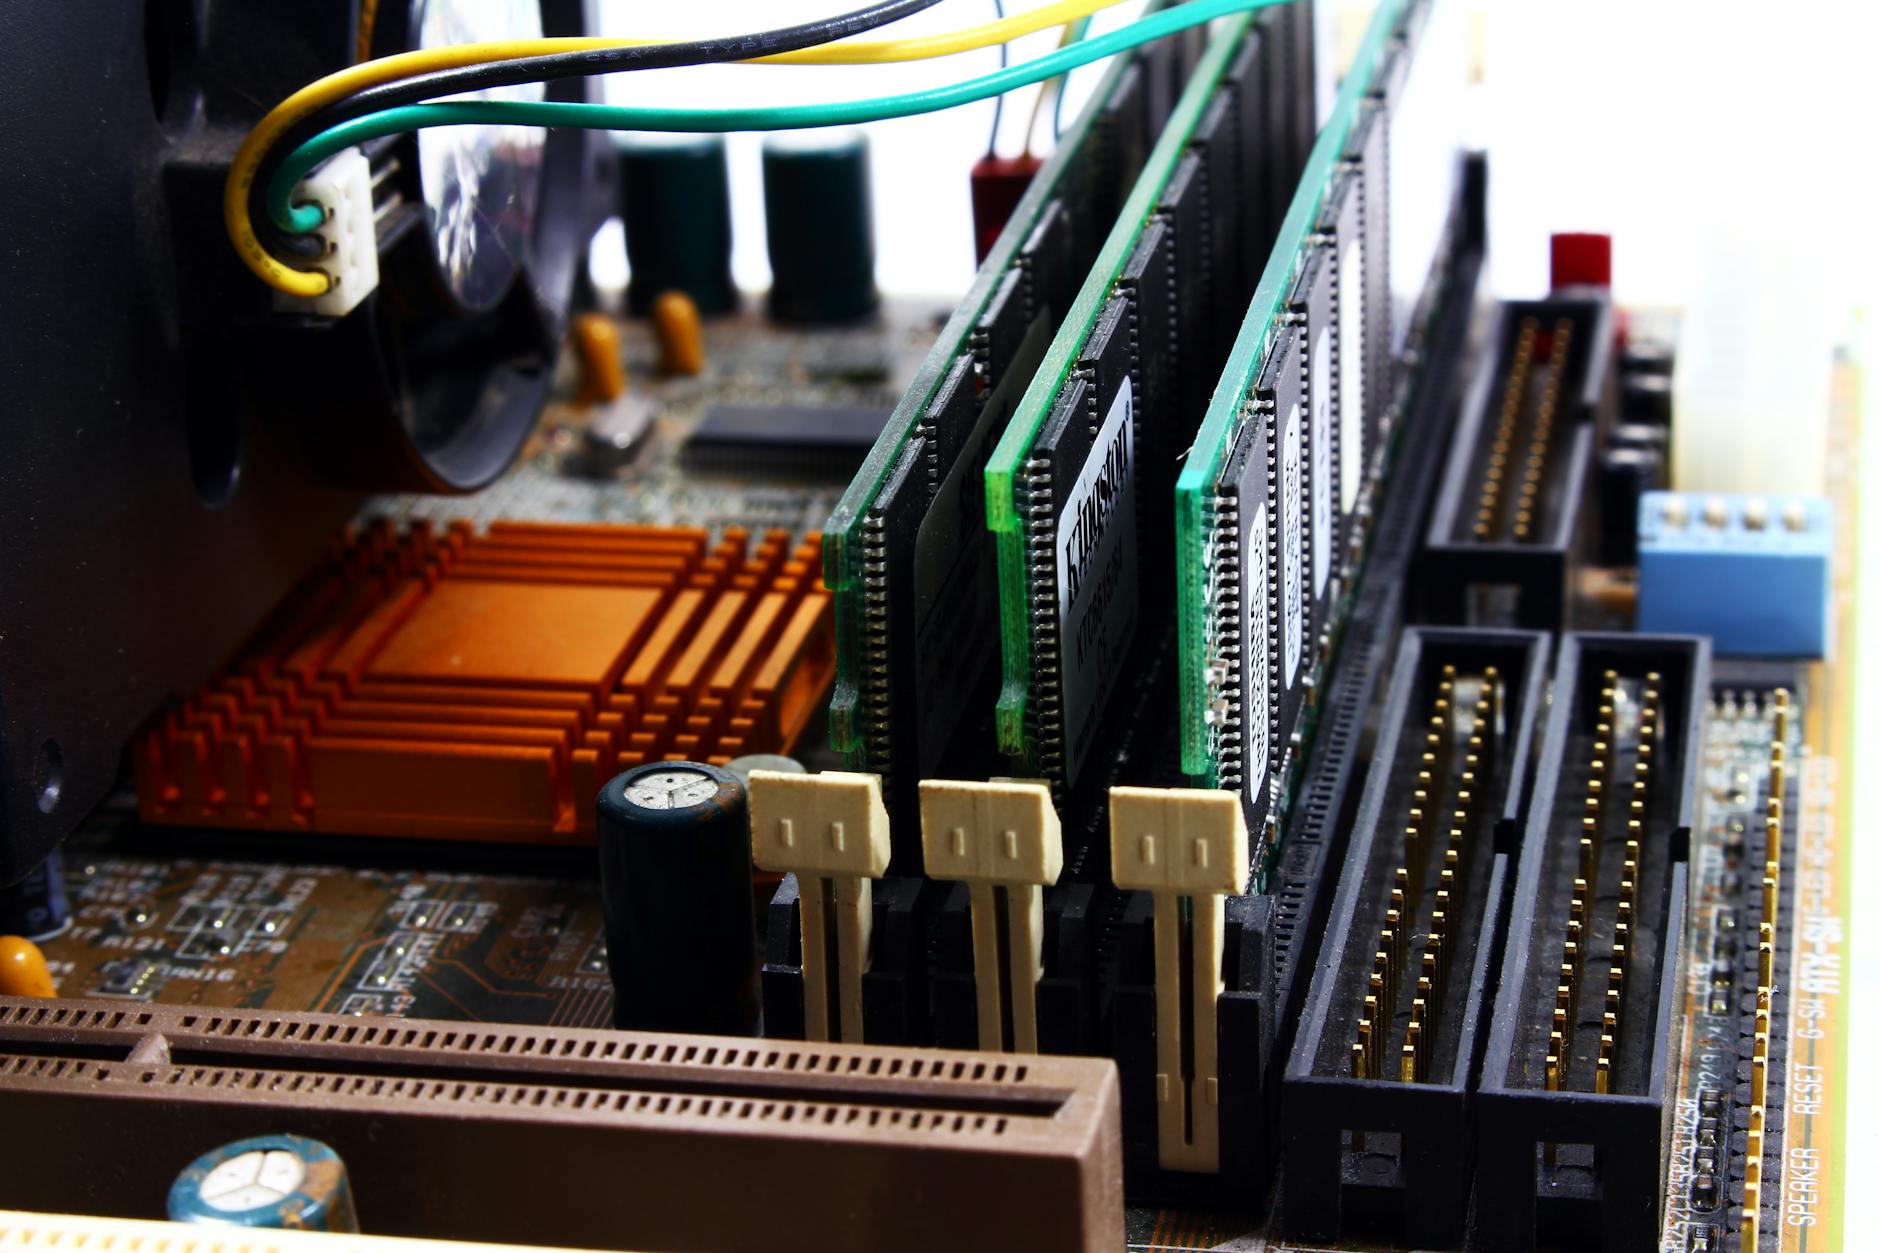 Image of 3 RAM sticks placed on a mother board.